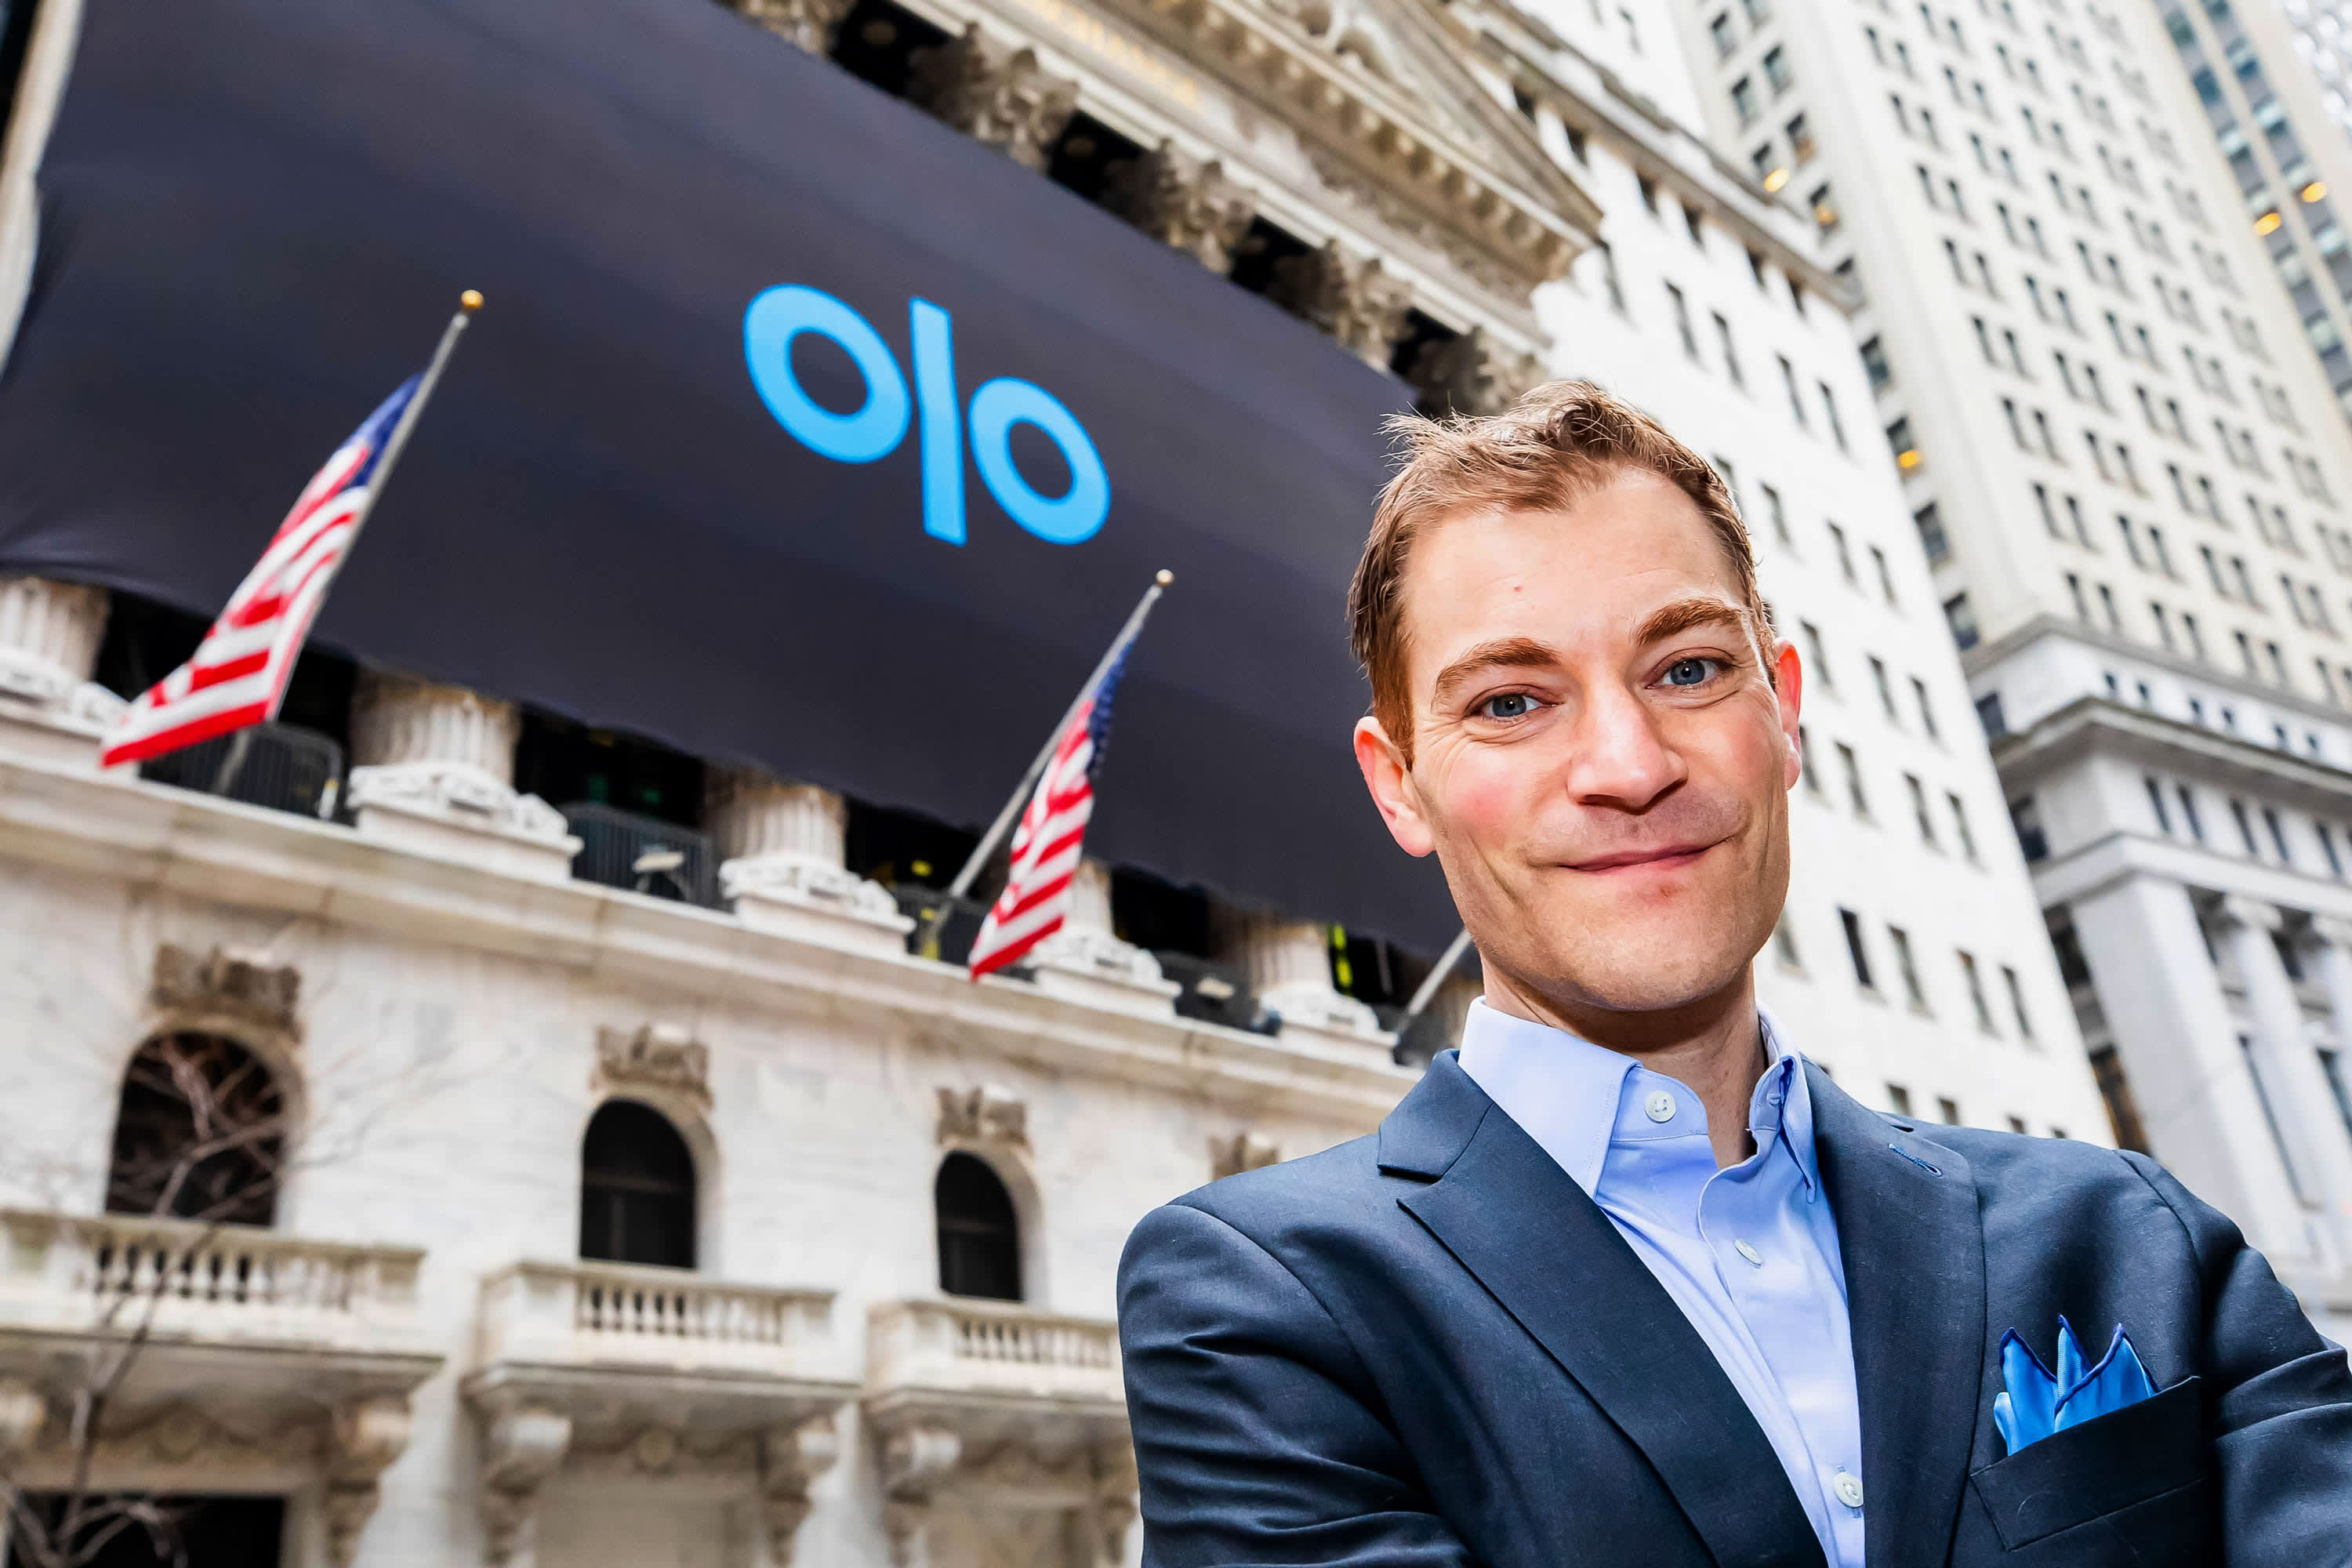 Restaurant technology firm Olo shares rise more than 20% in IPO as online order increases